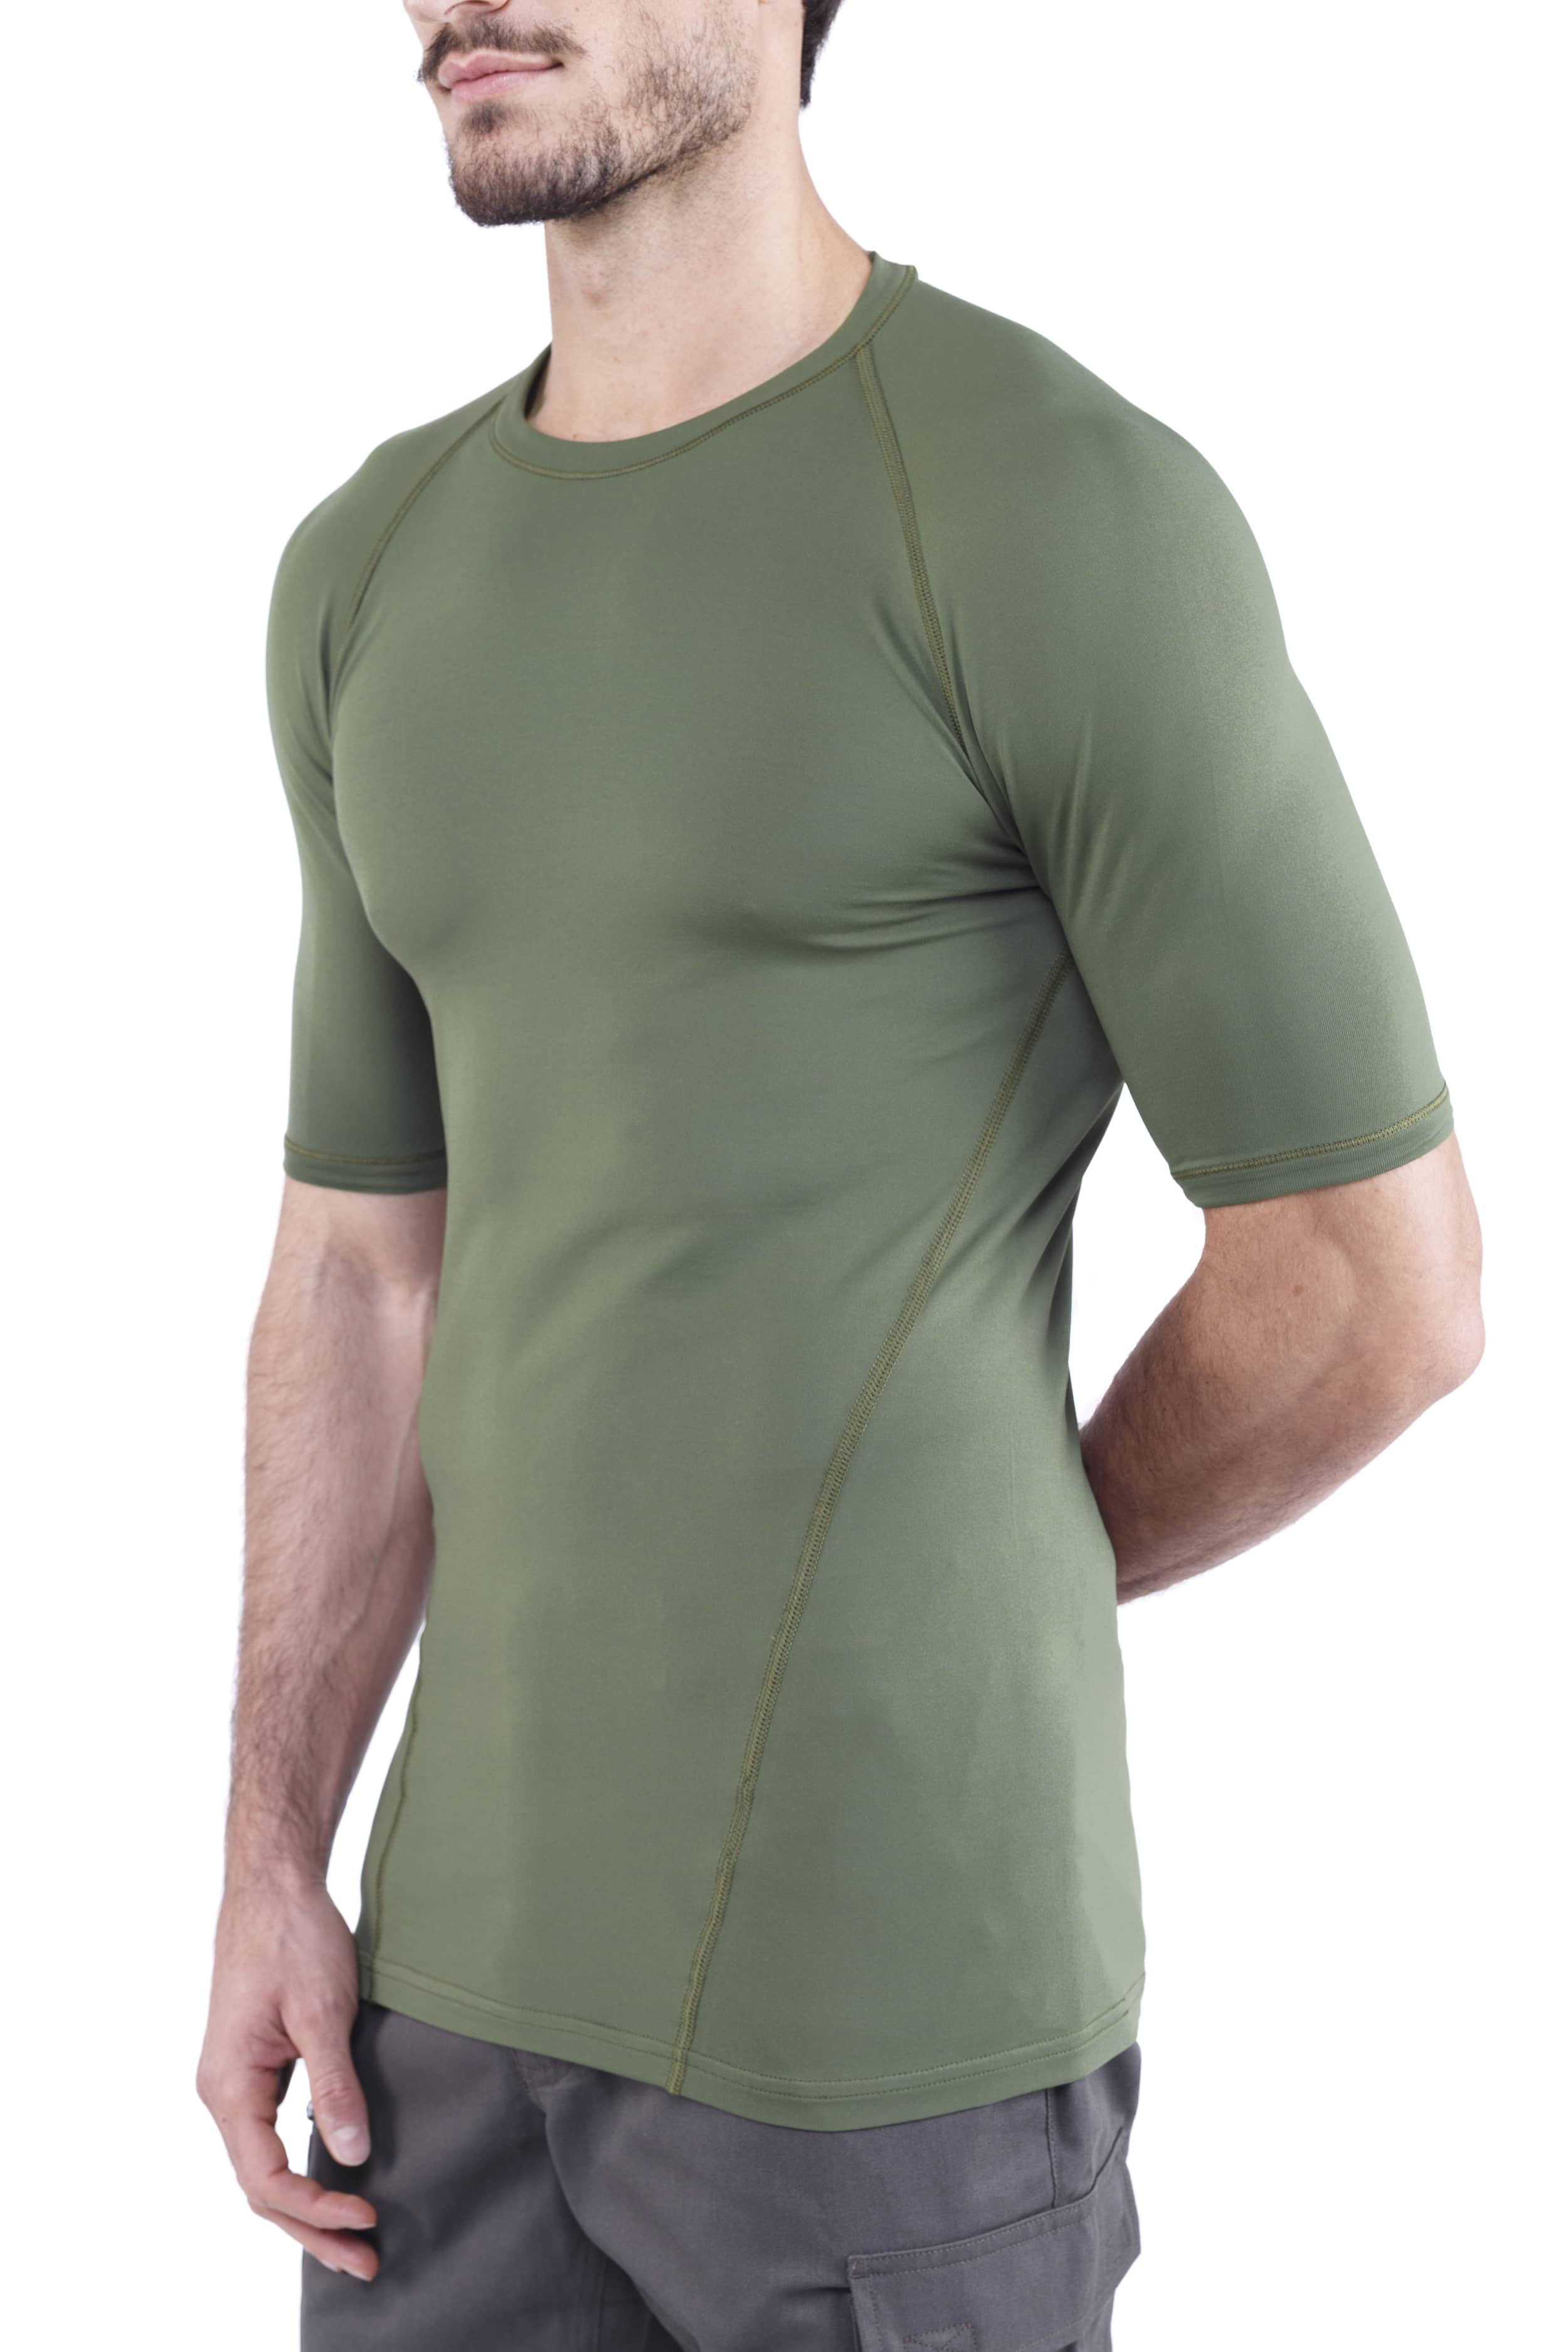 ARMY COMBAT T-SHIRT